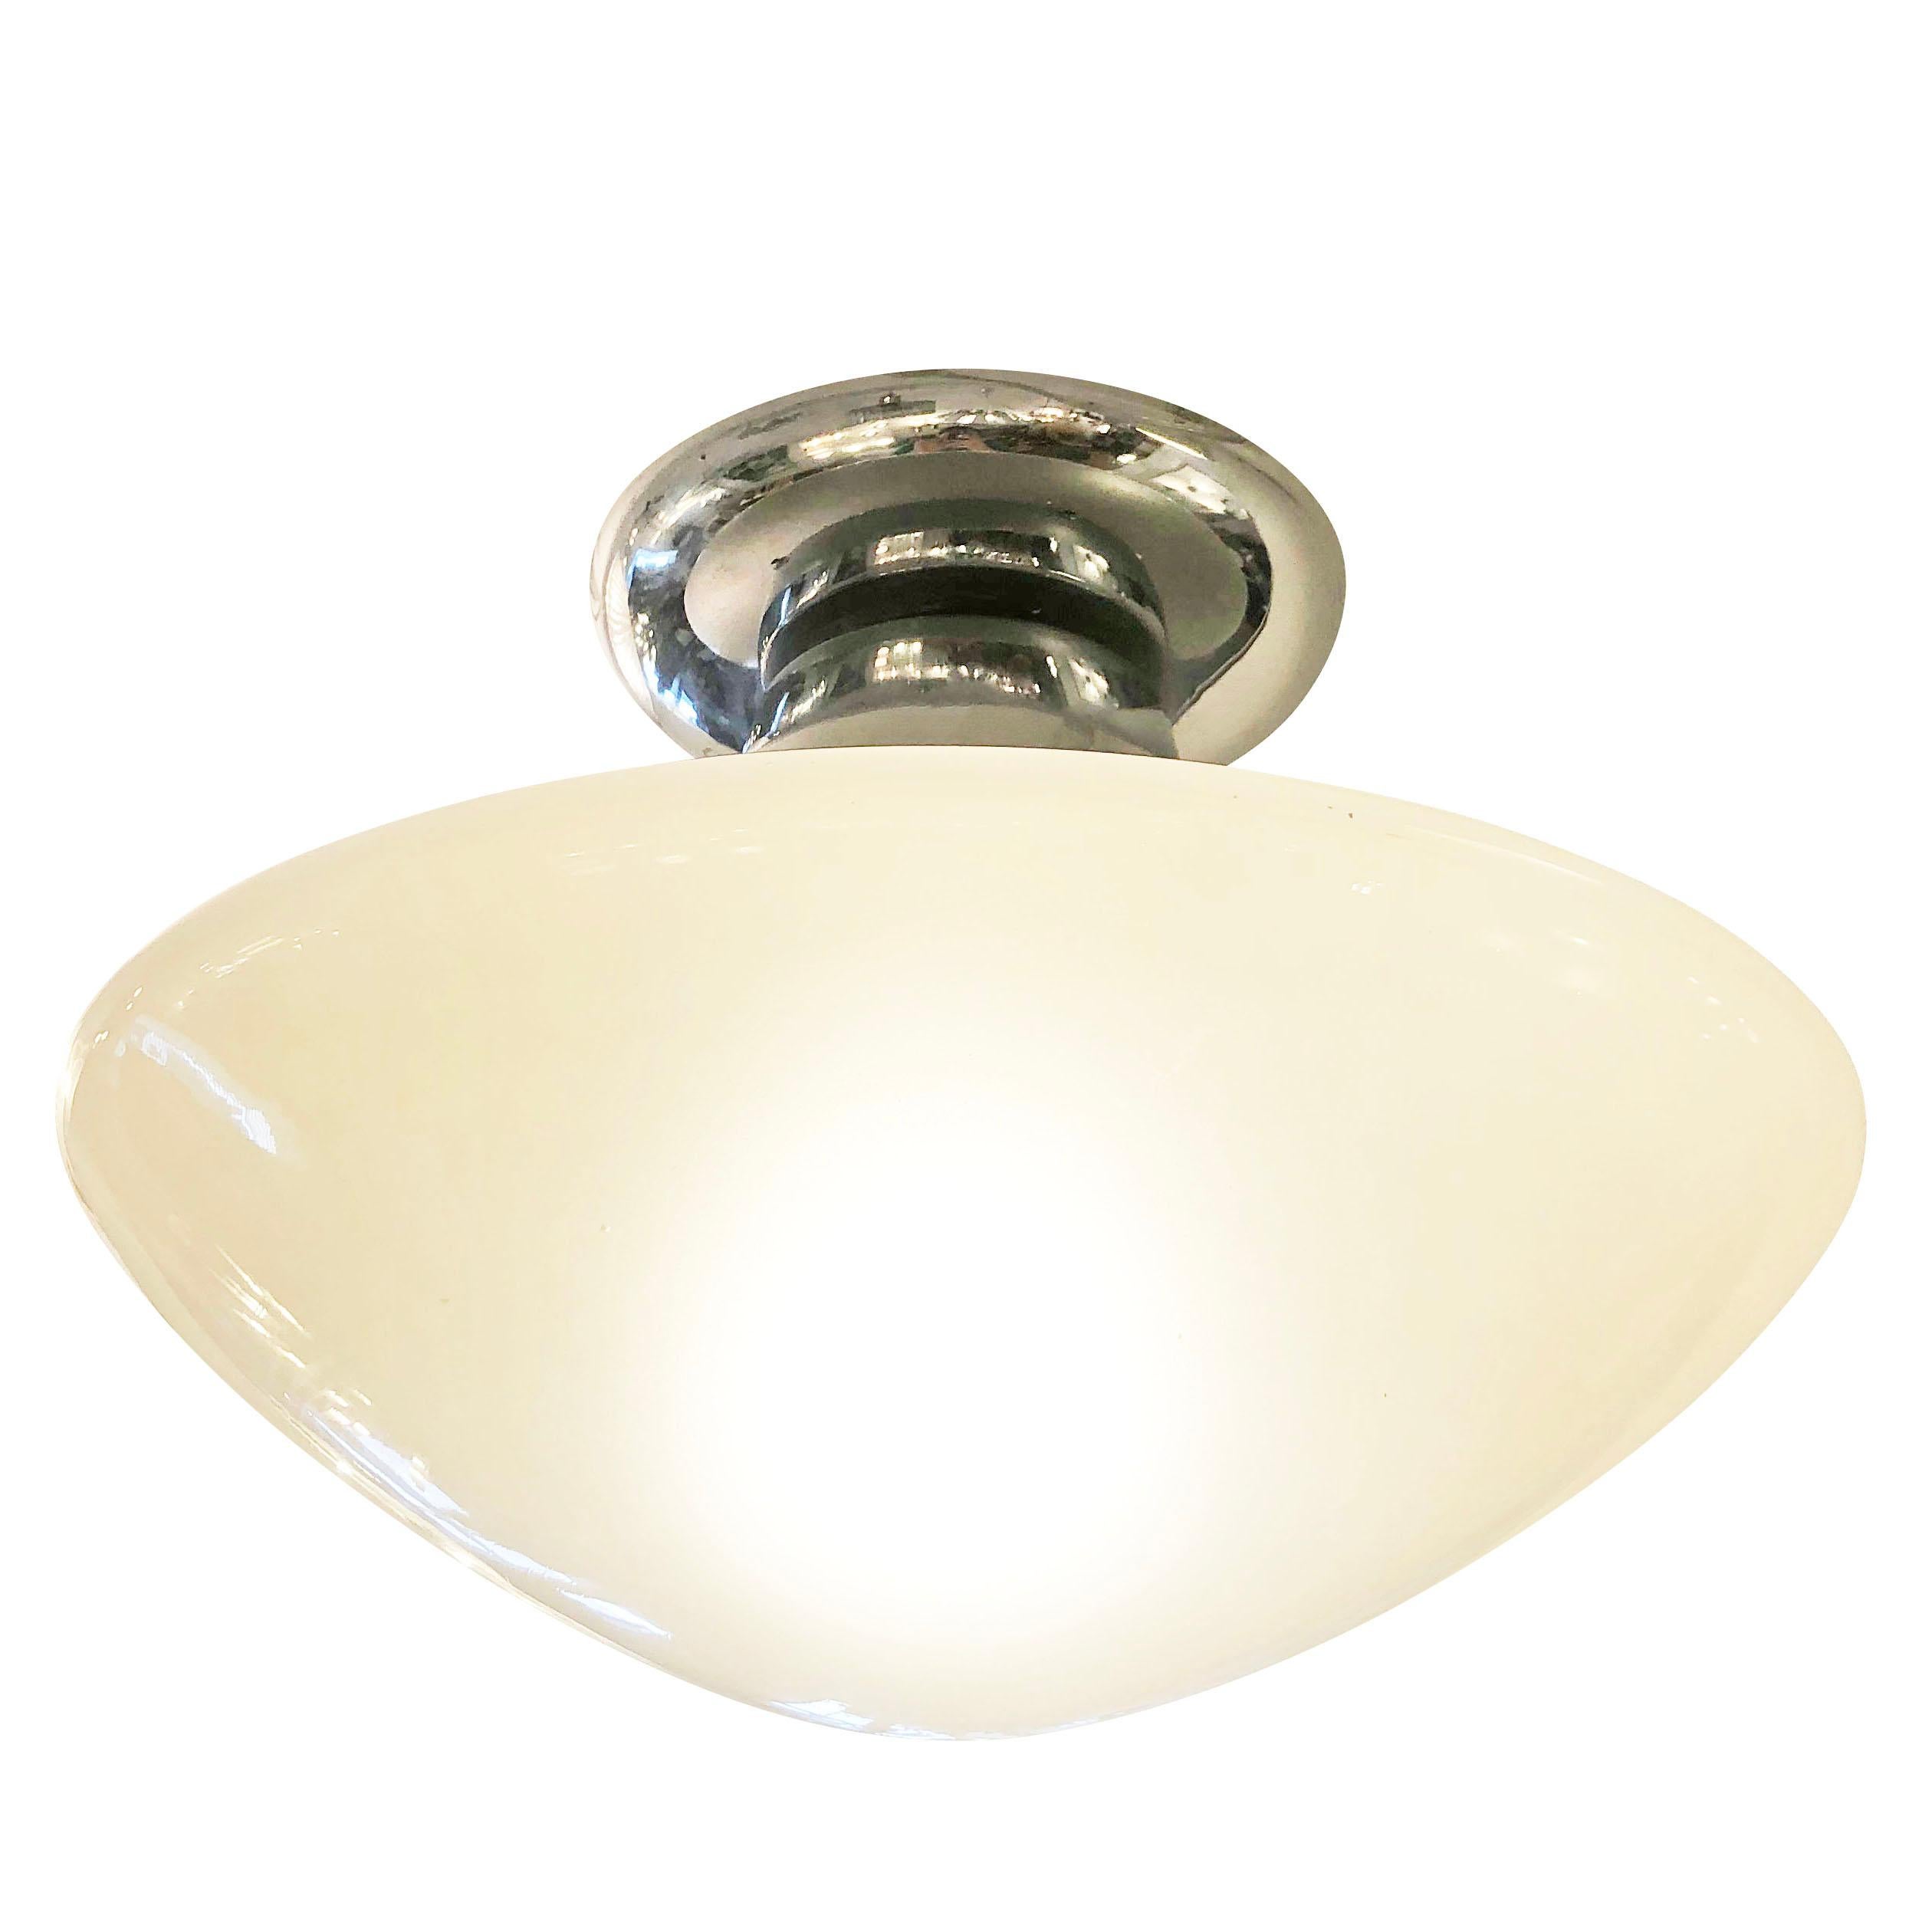 Italian midcentury semi-flushmount by Greco with an opaline glass shade and chrome frame. Holds one E26 socket. Two available

Condition: Excellent vintage condition, minor wear consistent with age an use

Measures: Diameter 15”

Height